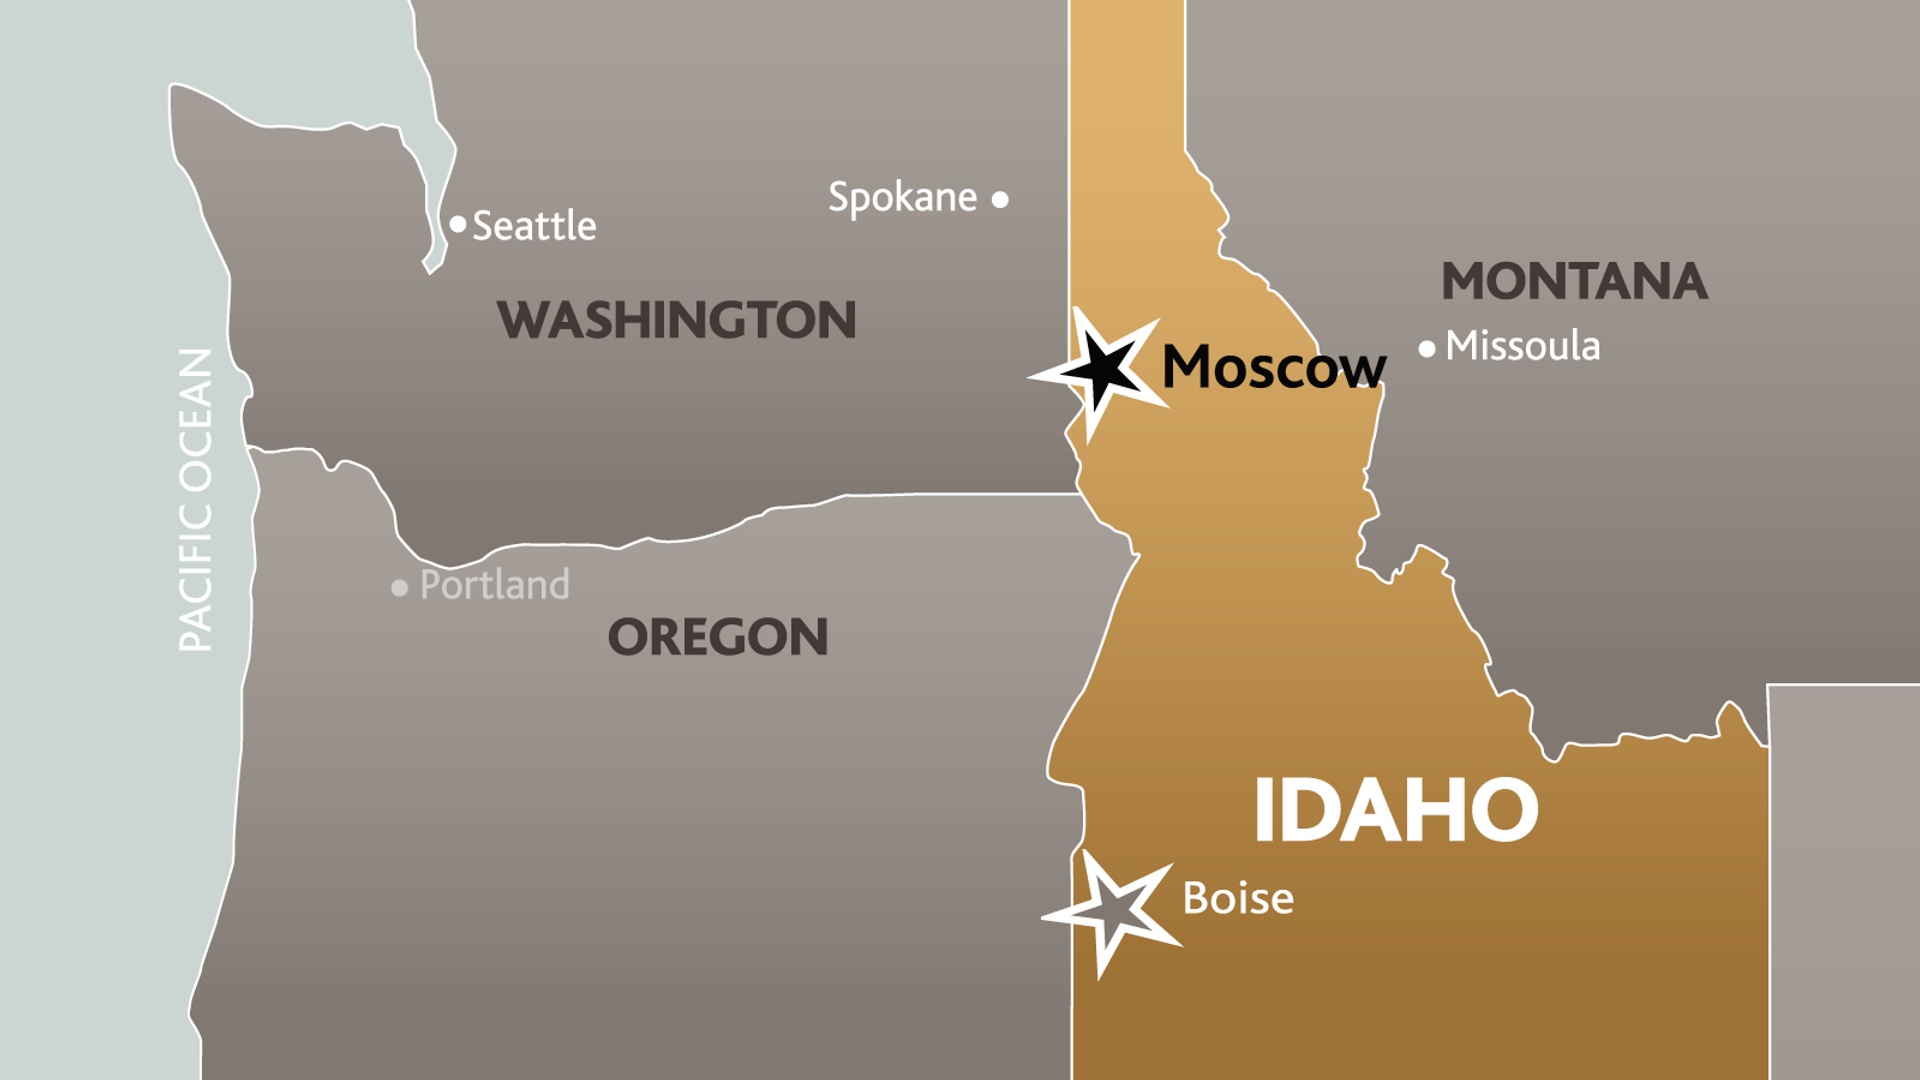  A map of Idaho and surrounding state with Moscow and Boise's locations marked with a star. 